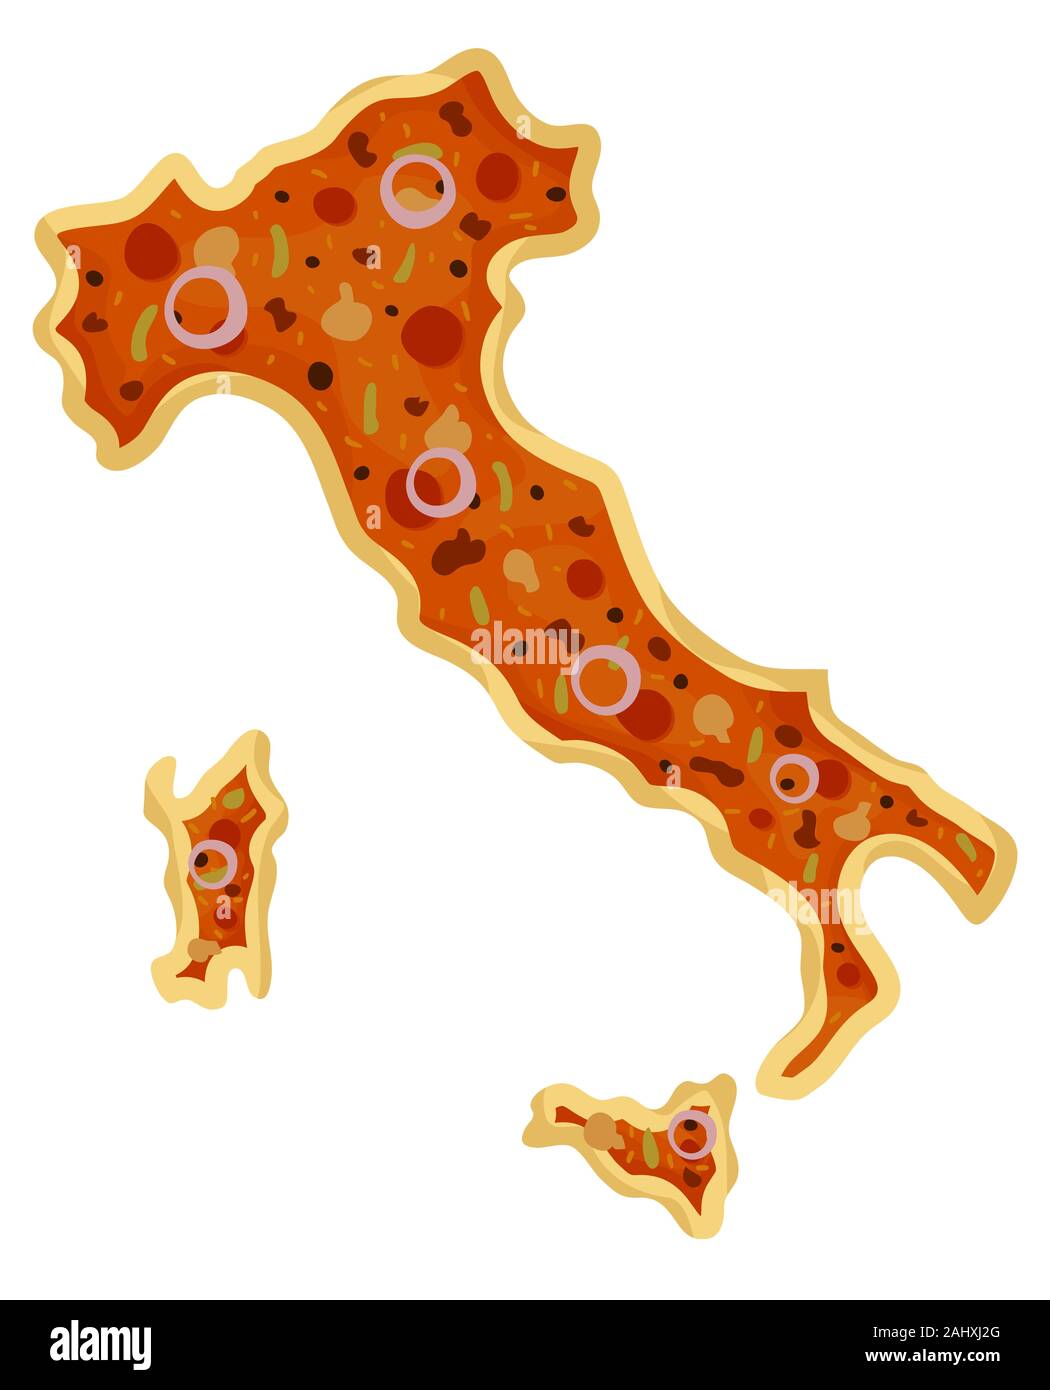 Illustration of a Pizza Map Showing Italy Stock Photo